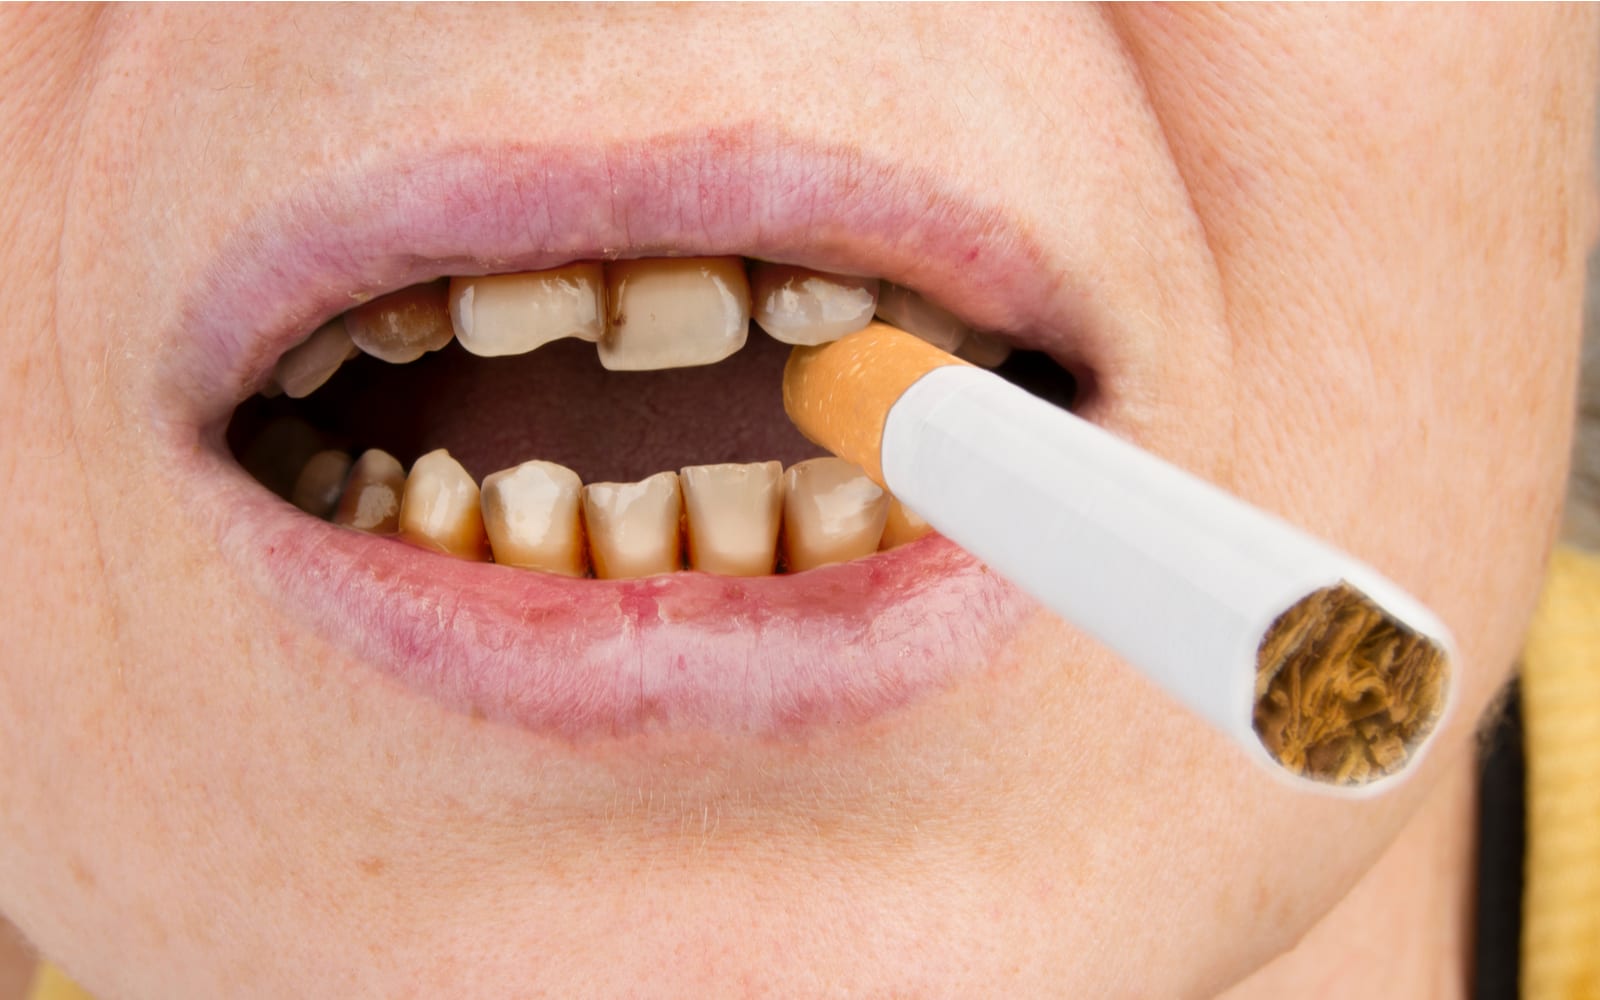 How Tobacco Can Be Your Oral Health’s Worst Enemy